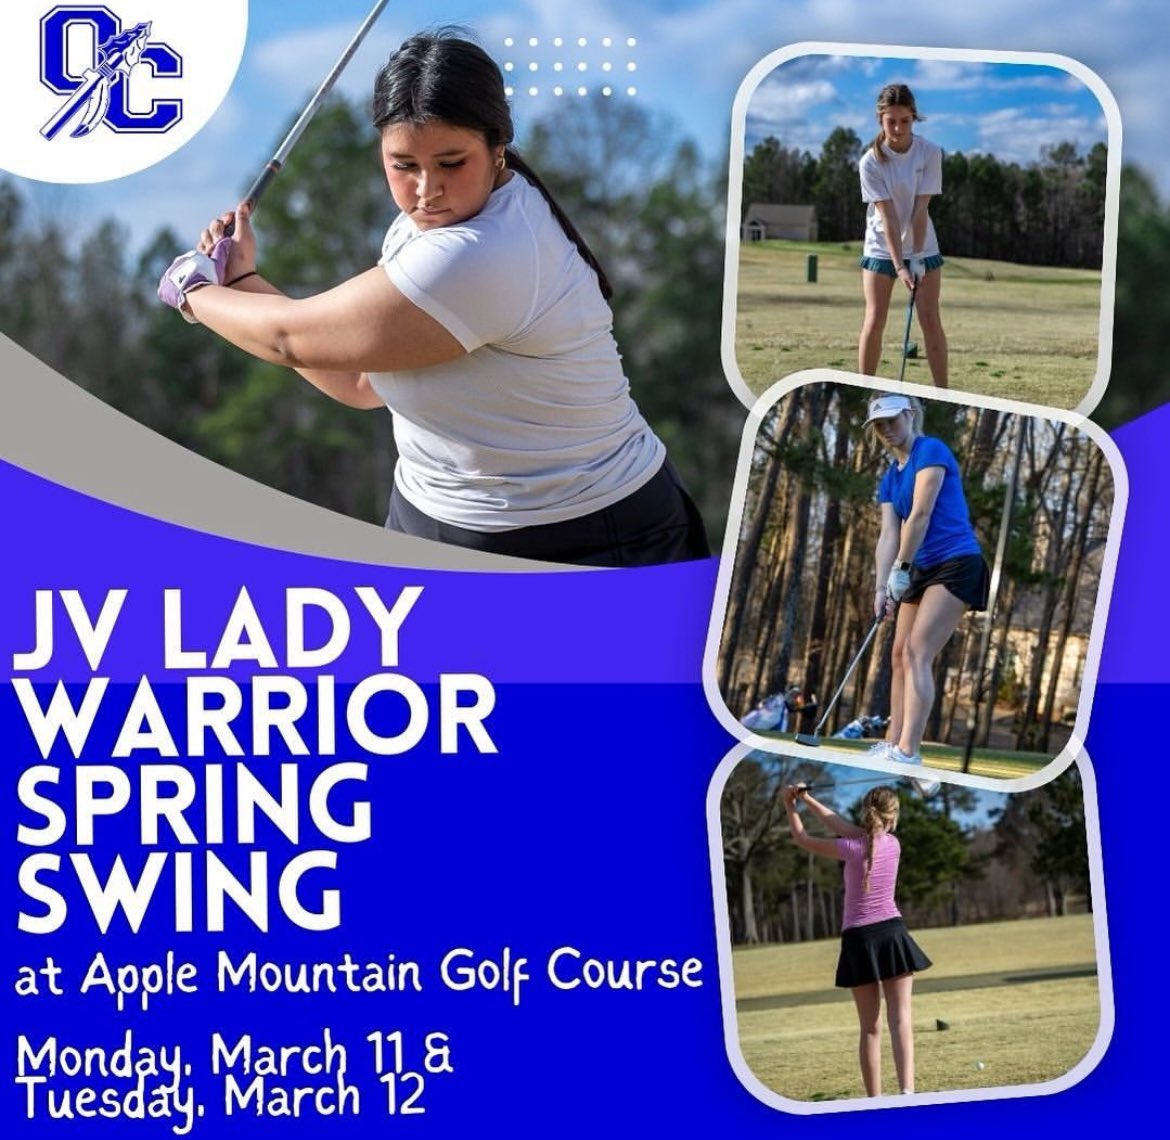 The Lady Warriors are ready to #gripitandripit⛳️ at the JV Lady Warrior Spring Swing!